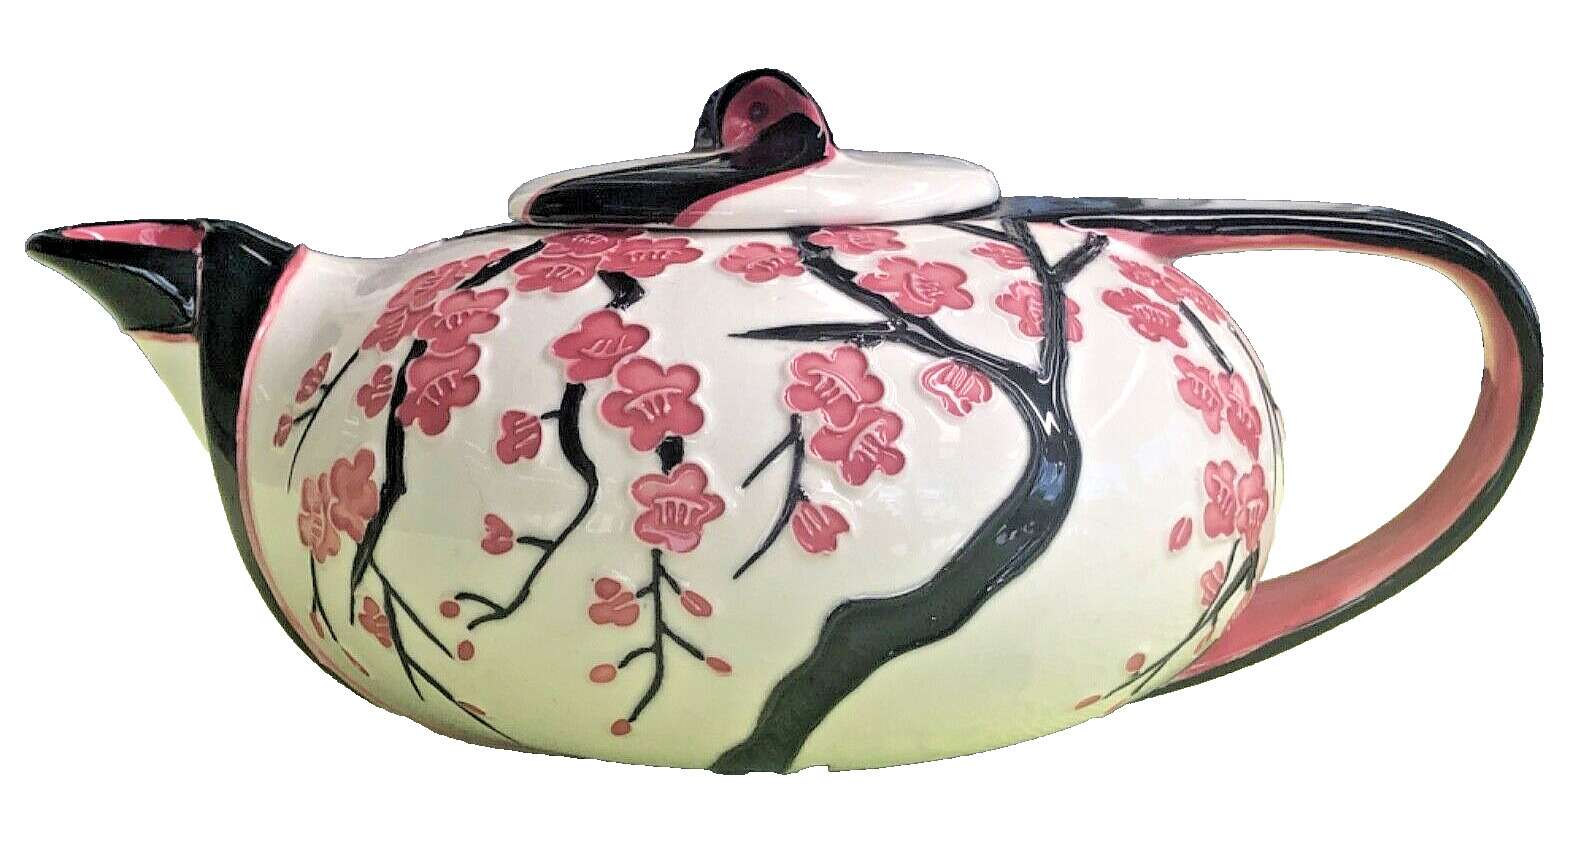 Benaya Cherry Blossom Teapot Unused A+ Cond. 2009 Signed Hand Painted